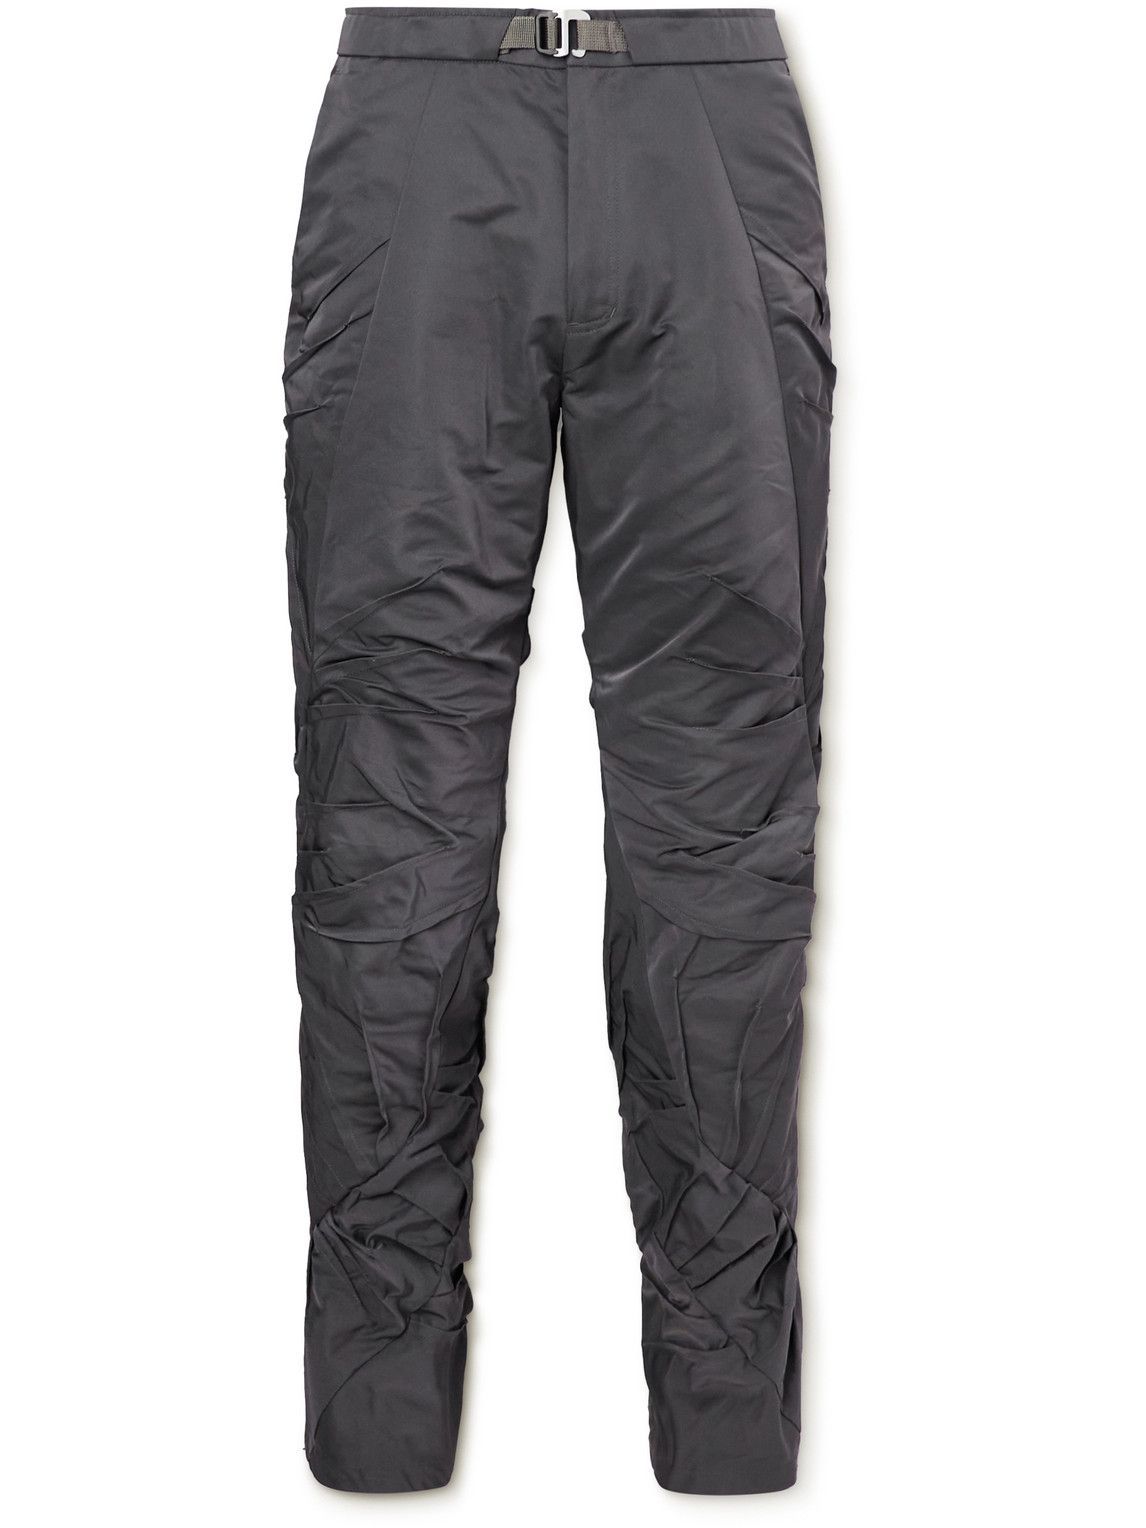 Post Archive Faction PAF Grey 3.0 Technical Left Trousers Post 